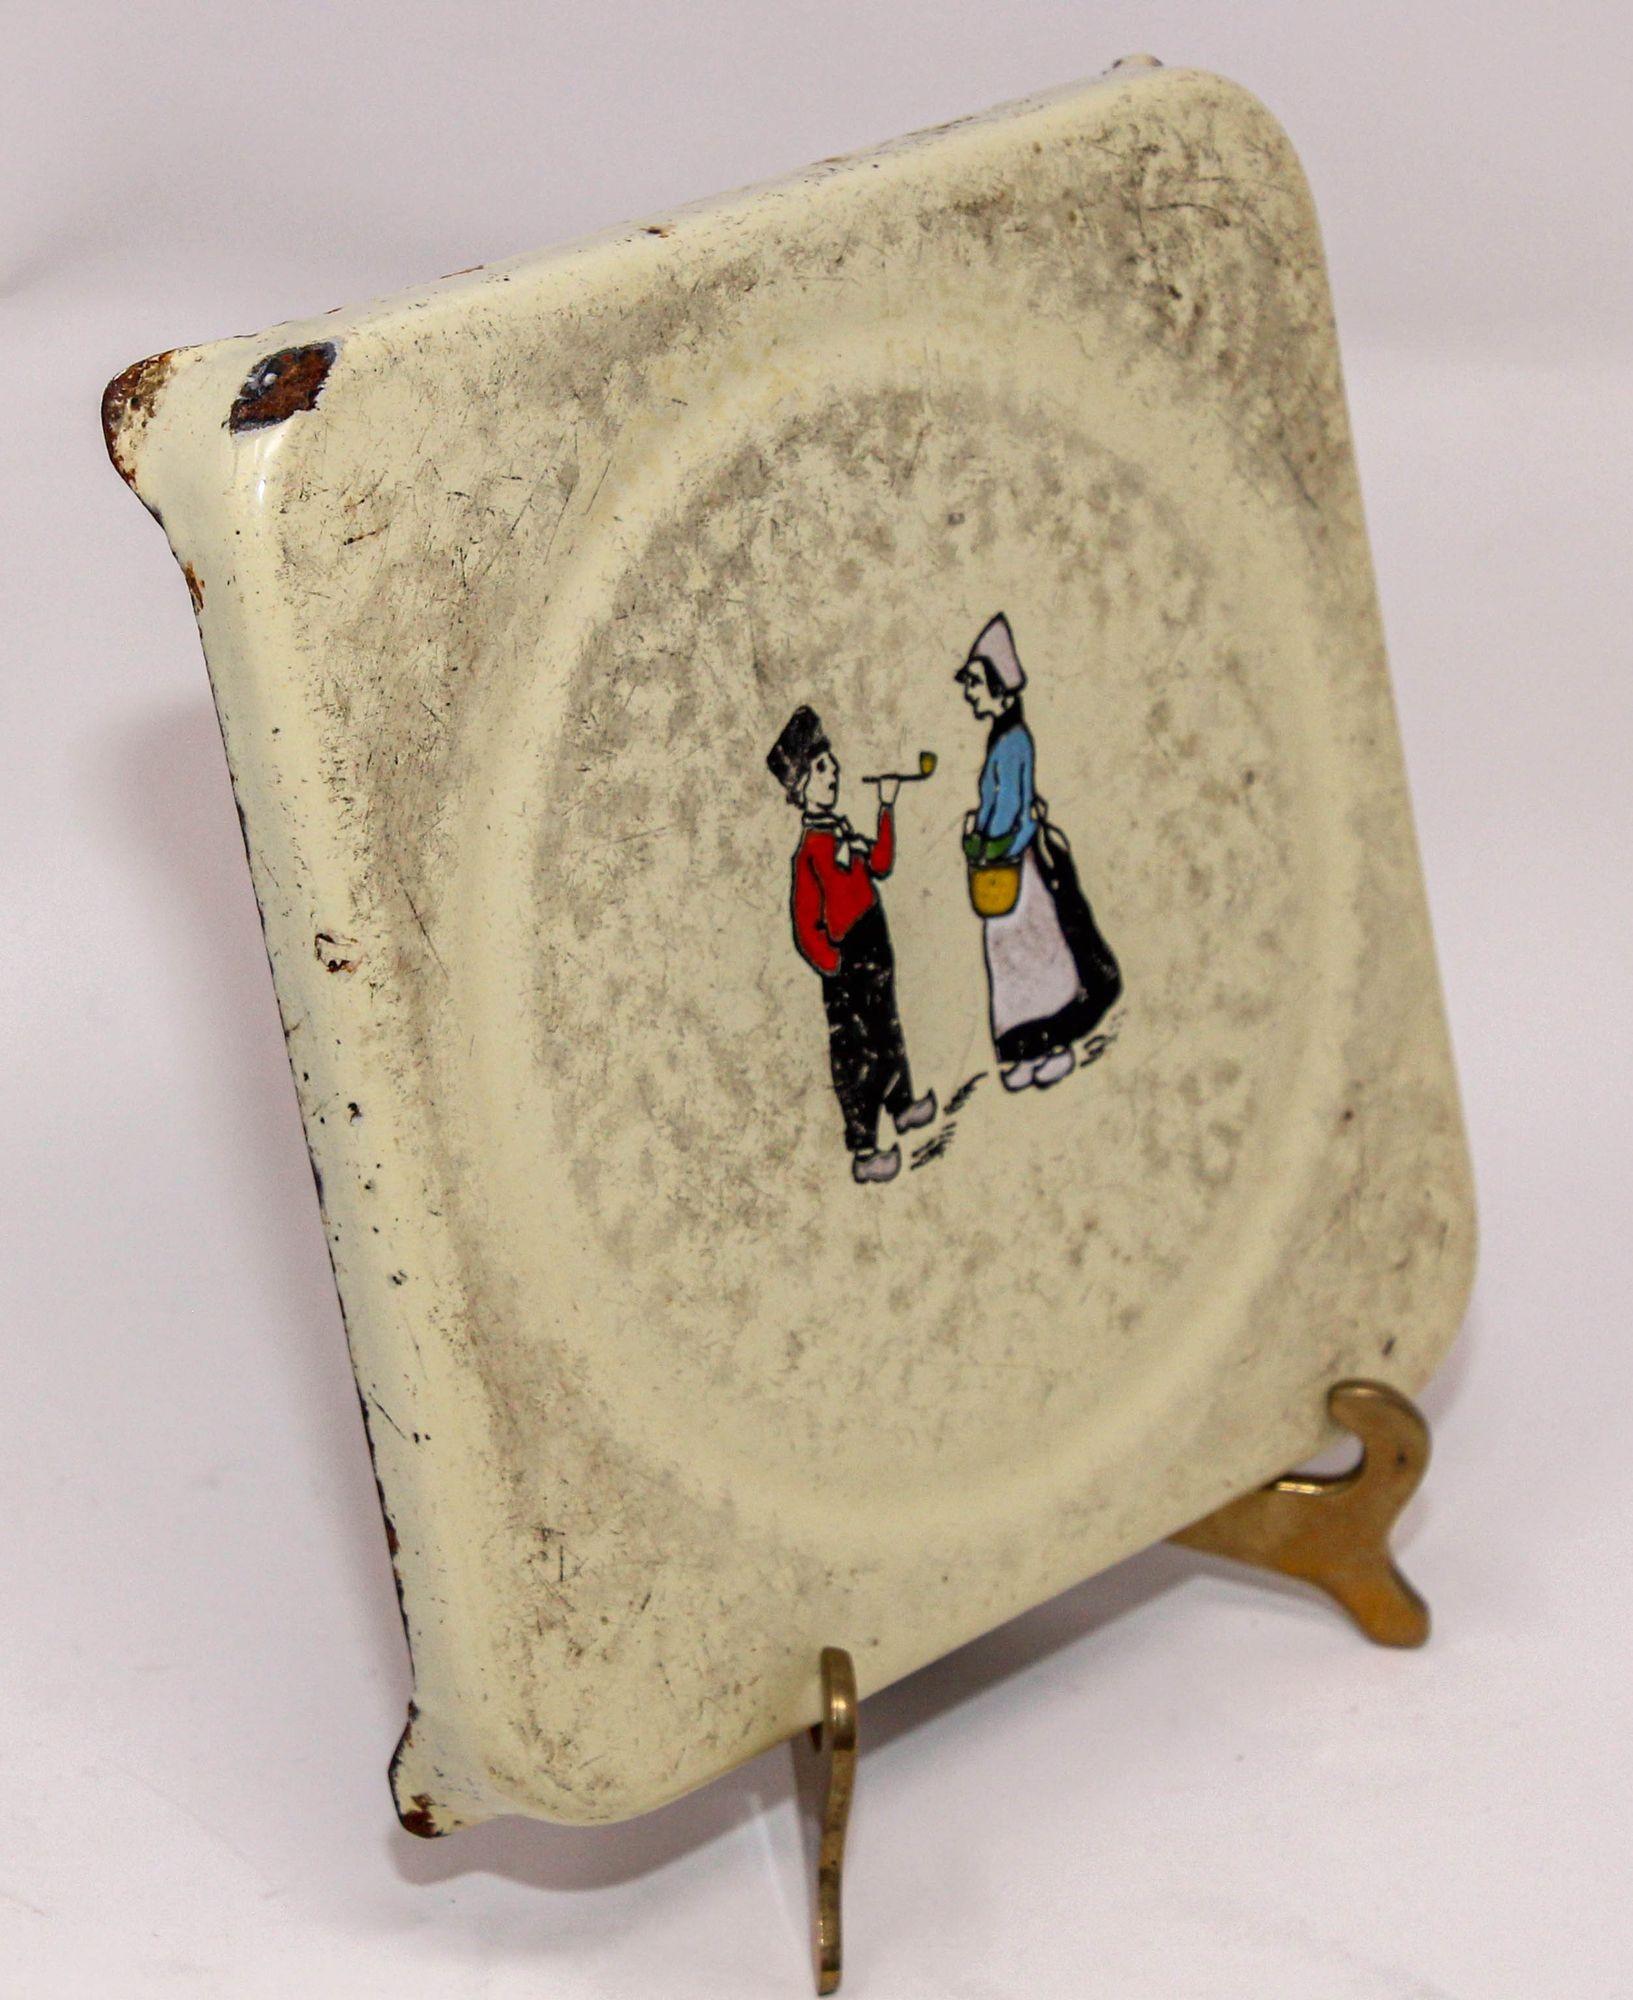 Antique early 20th century Hand Painted Dutch Theme Enamelware Metal circa 1920's.
Hand-painted decorative antique Dutch scene metalware hand made In North Europe, Netherlands, or Germany featuring a Dutch Man and Women. 
Antique pressed square